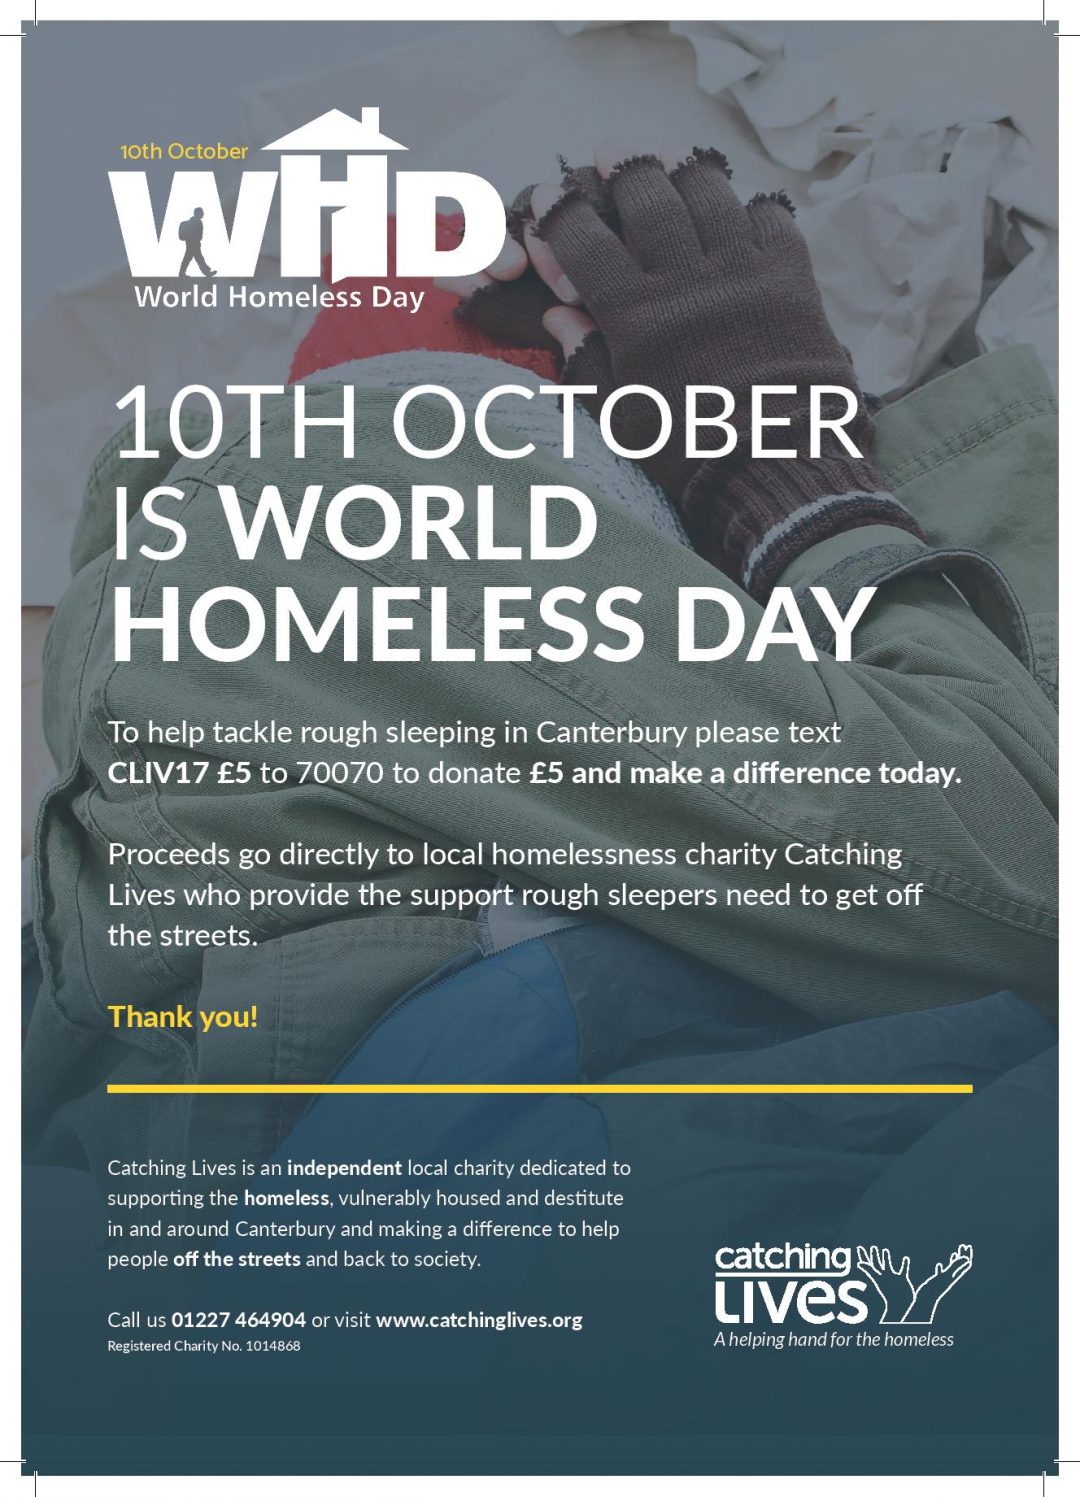 WHD - 10th October is World Homeless Day poster